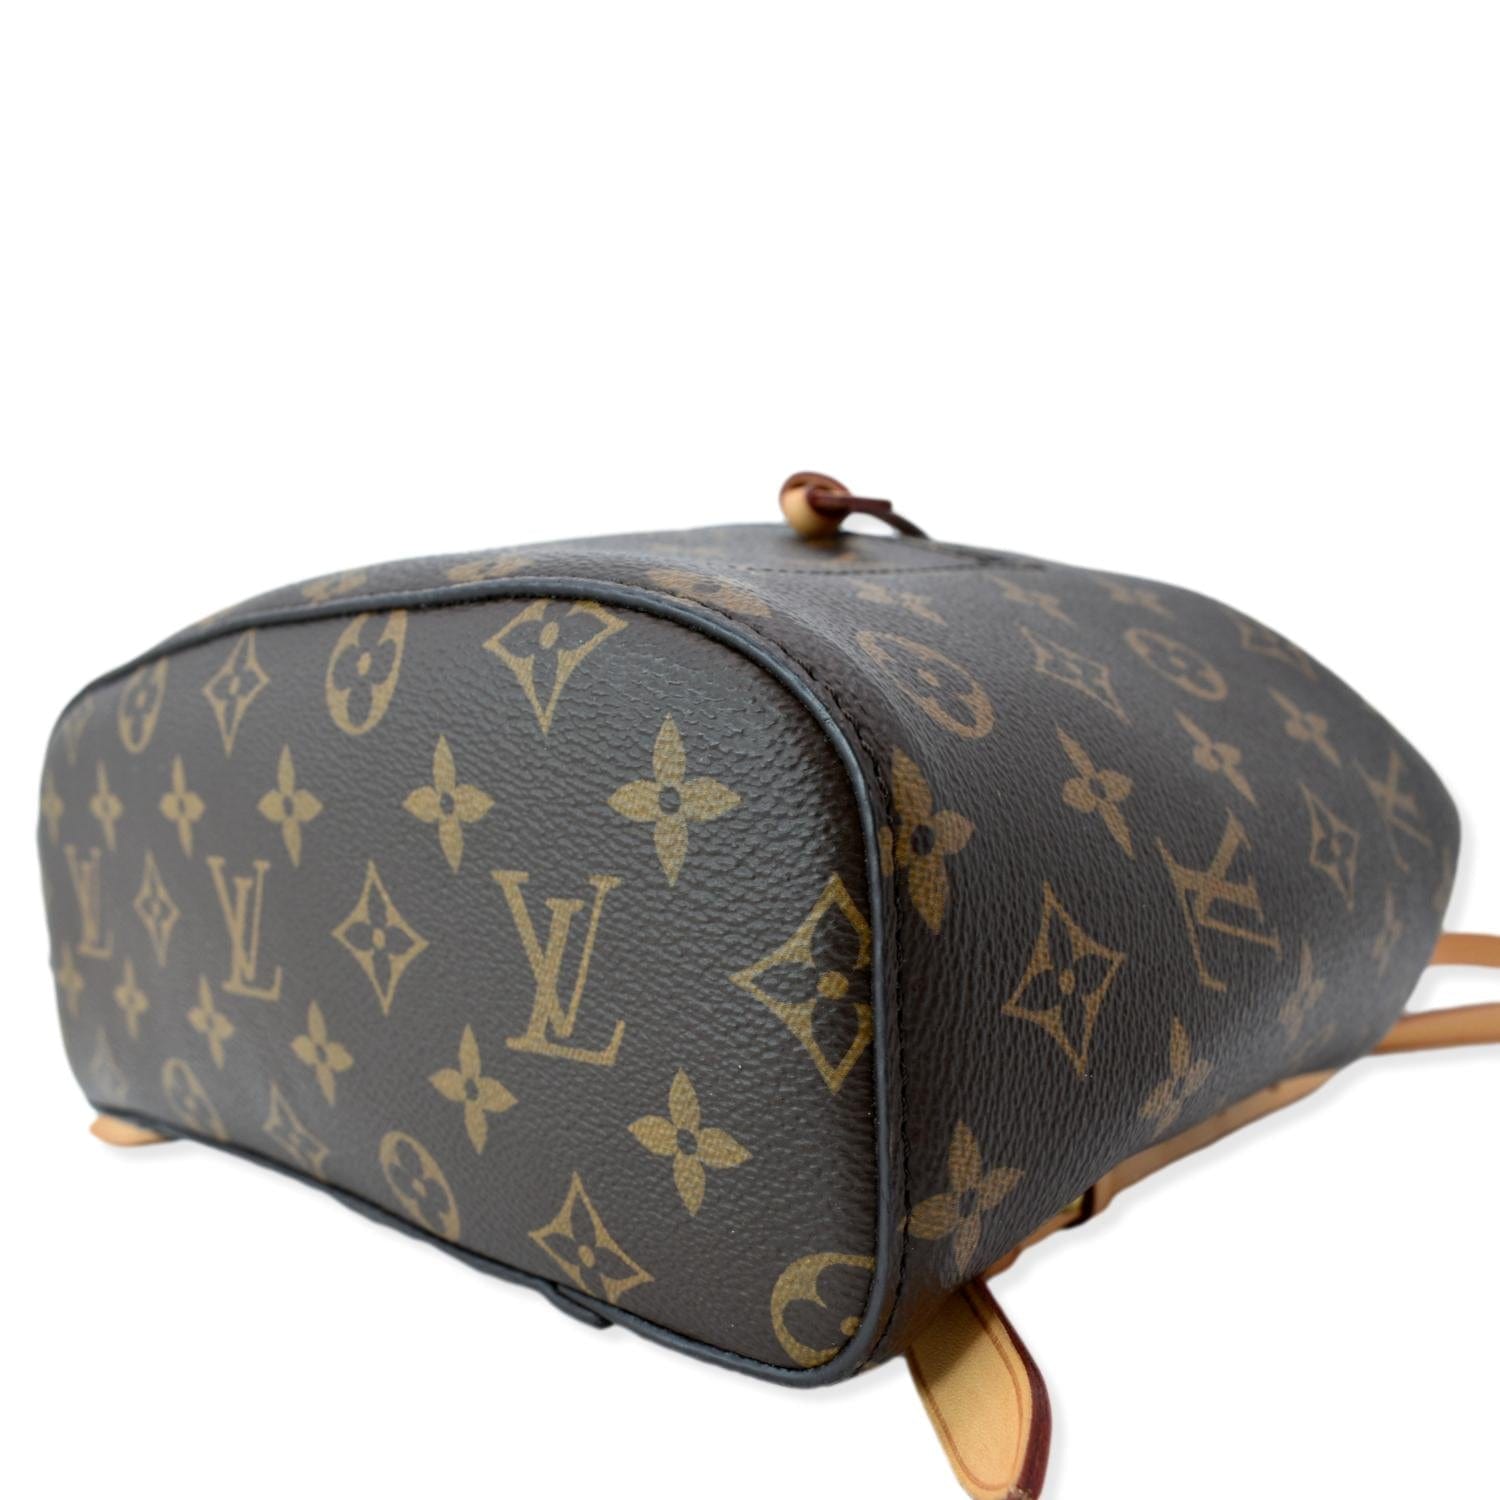 Louis Vuitton Montsouris NM Backpack Monogram Canvas with Leather PM Black  2376922